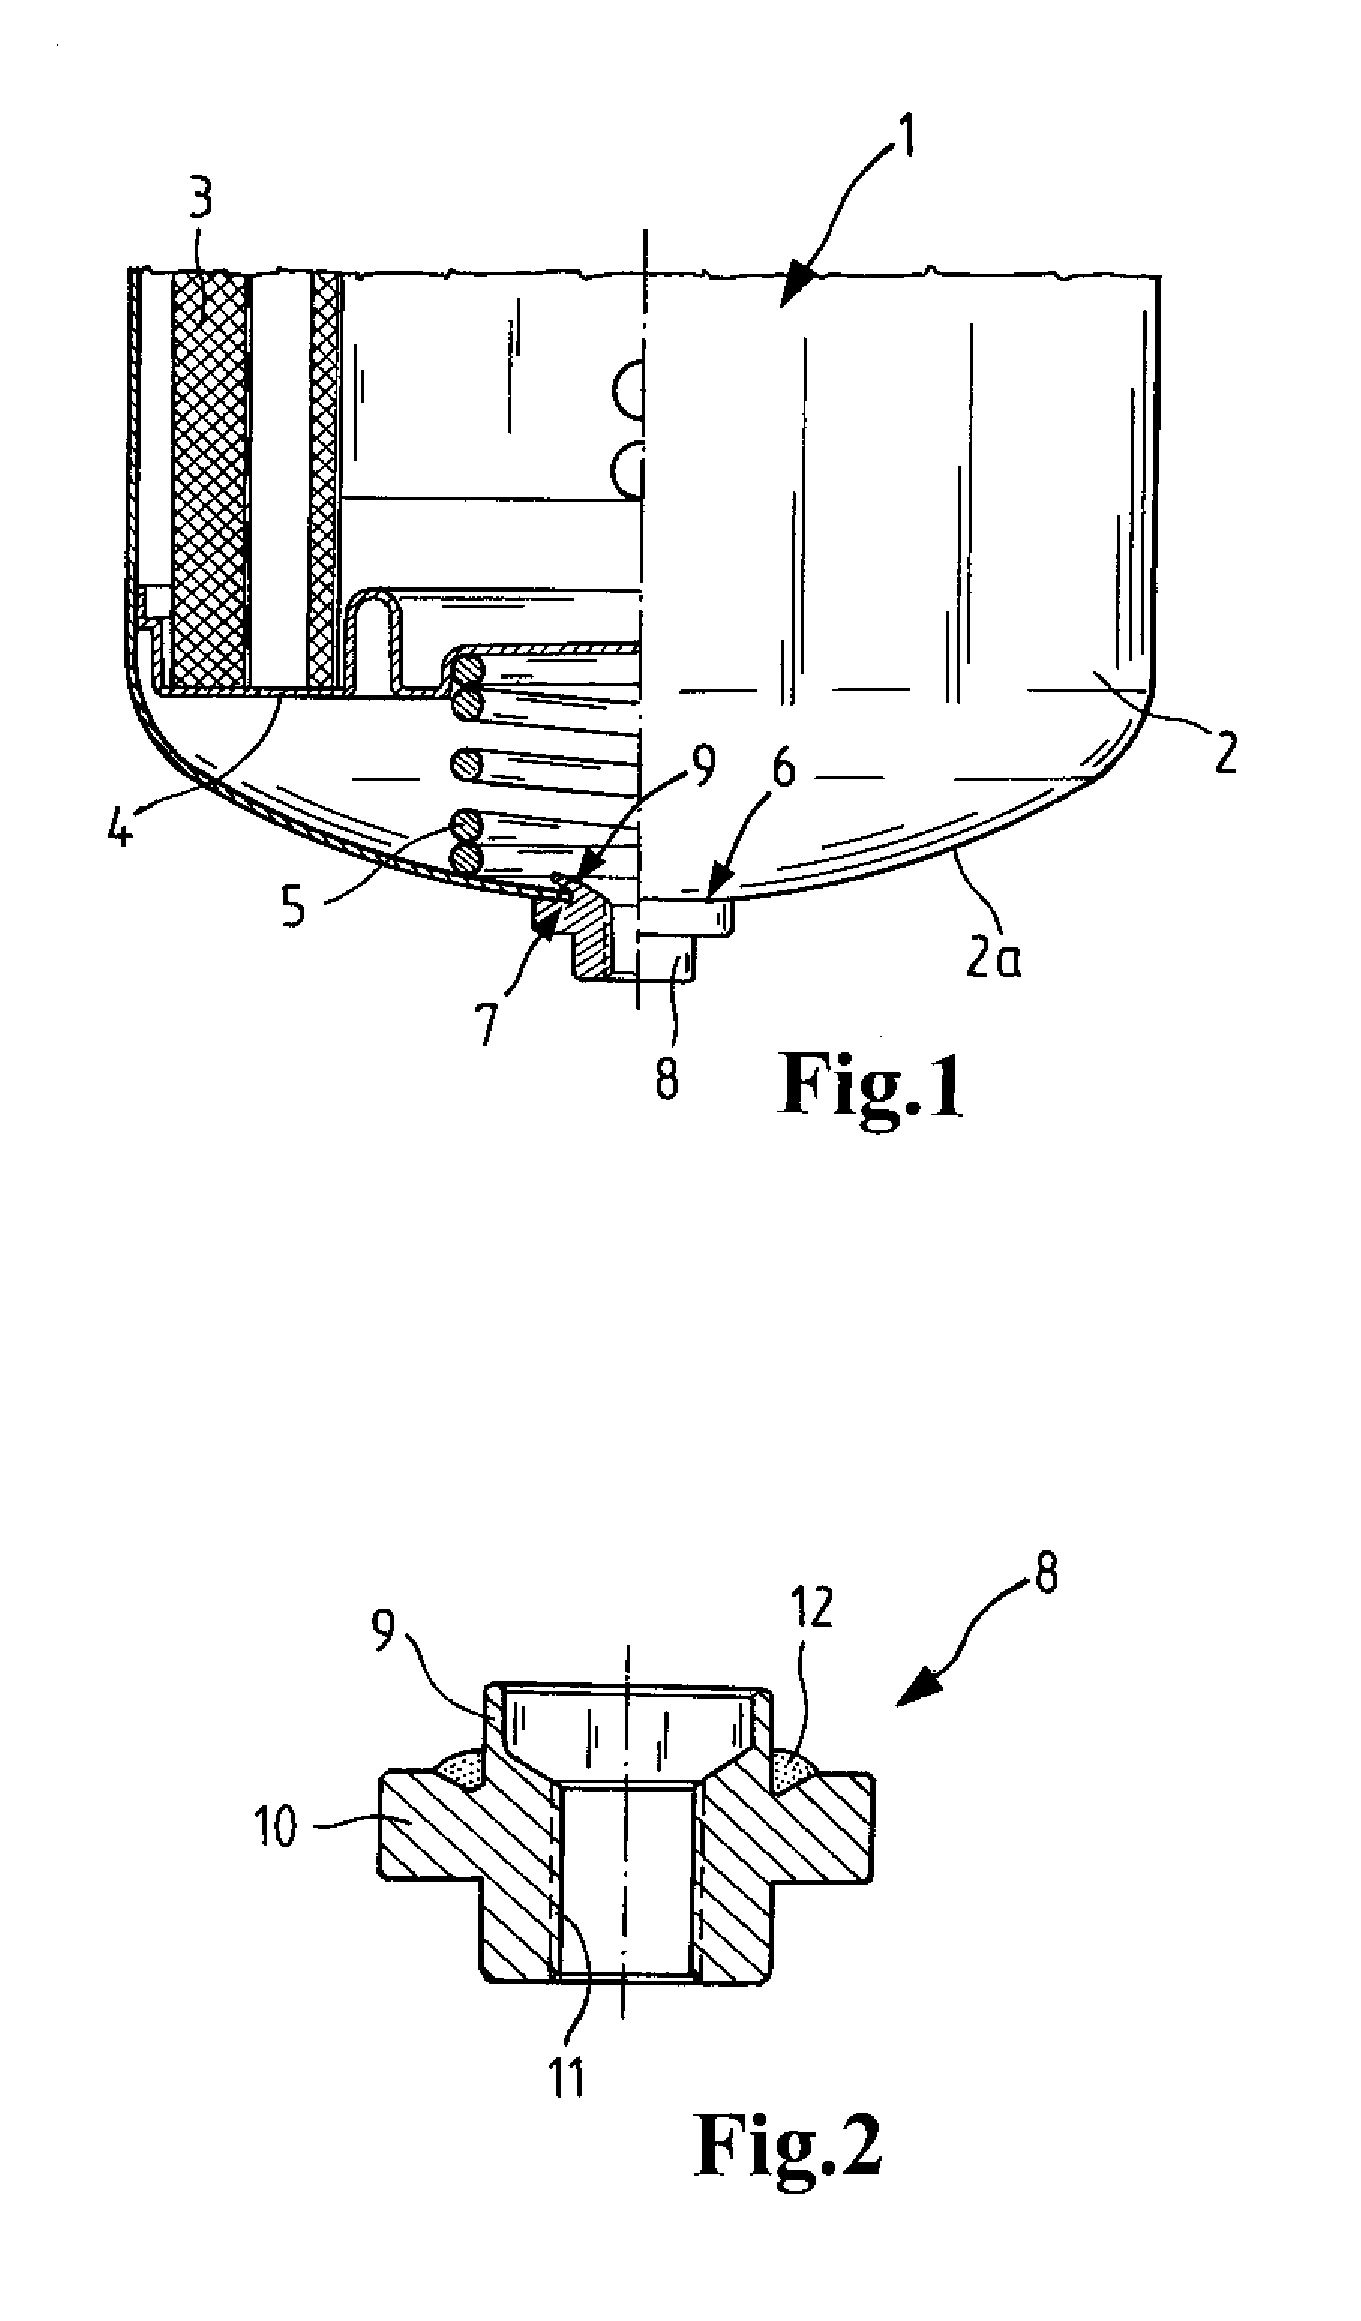 Housing Pot for Accommodating a Filter Element in a Filter Device